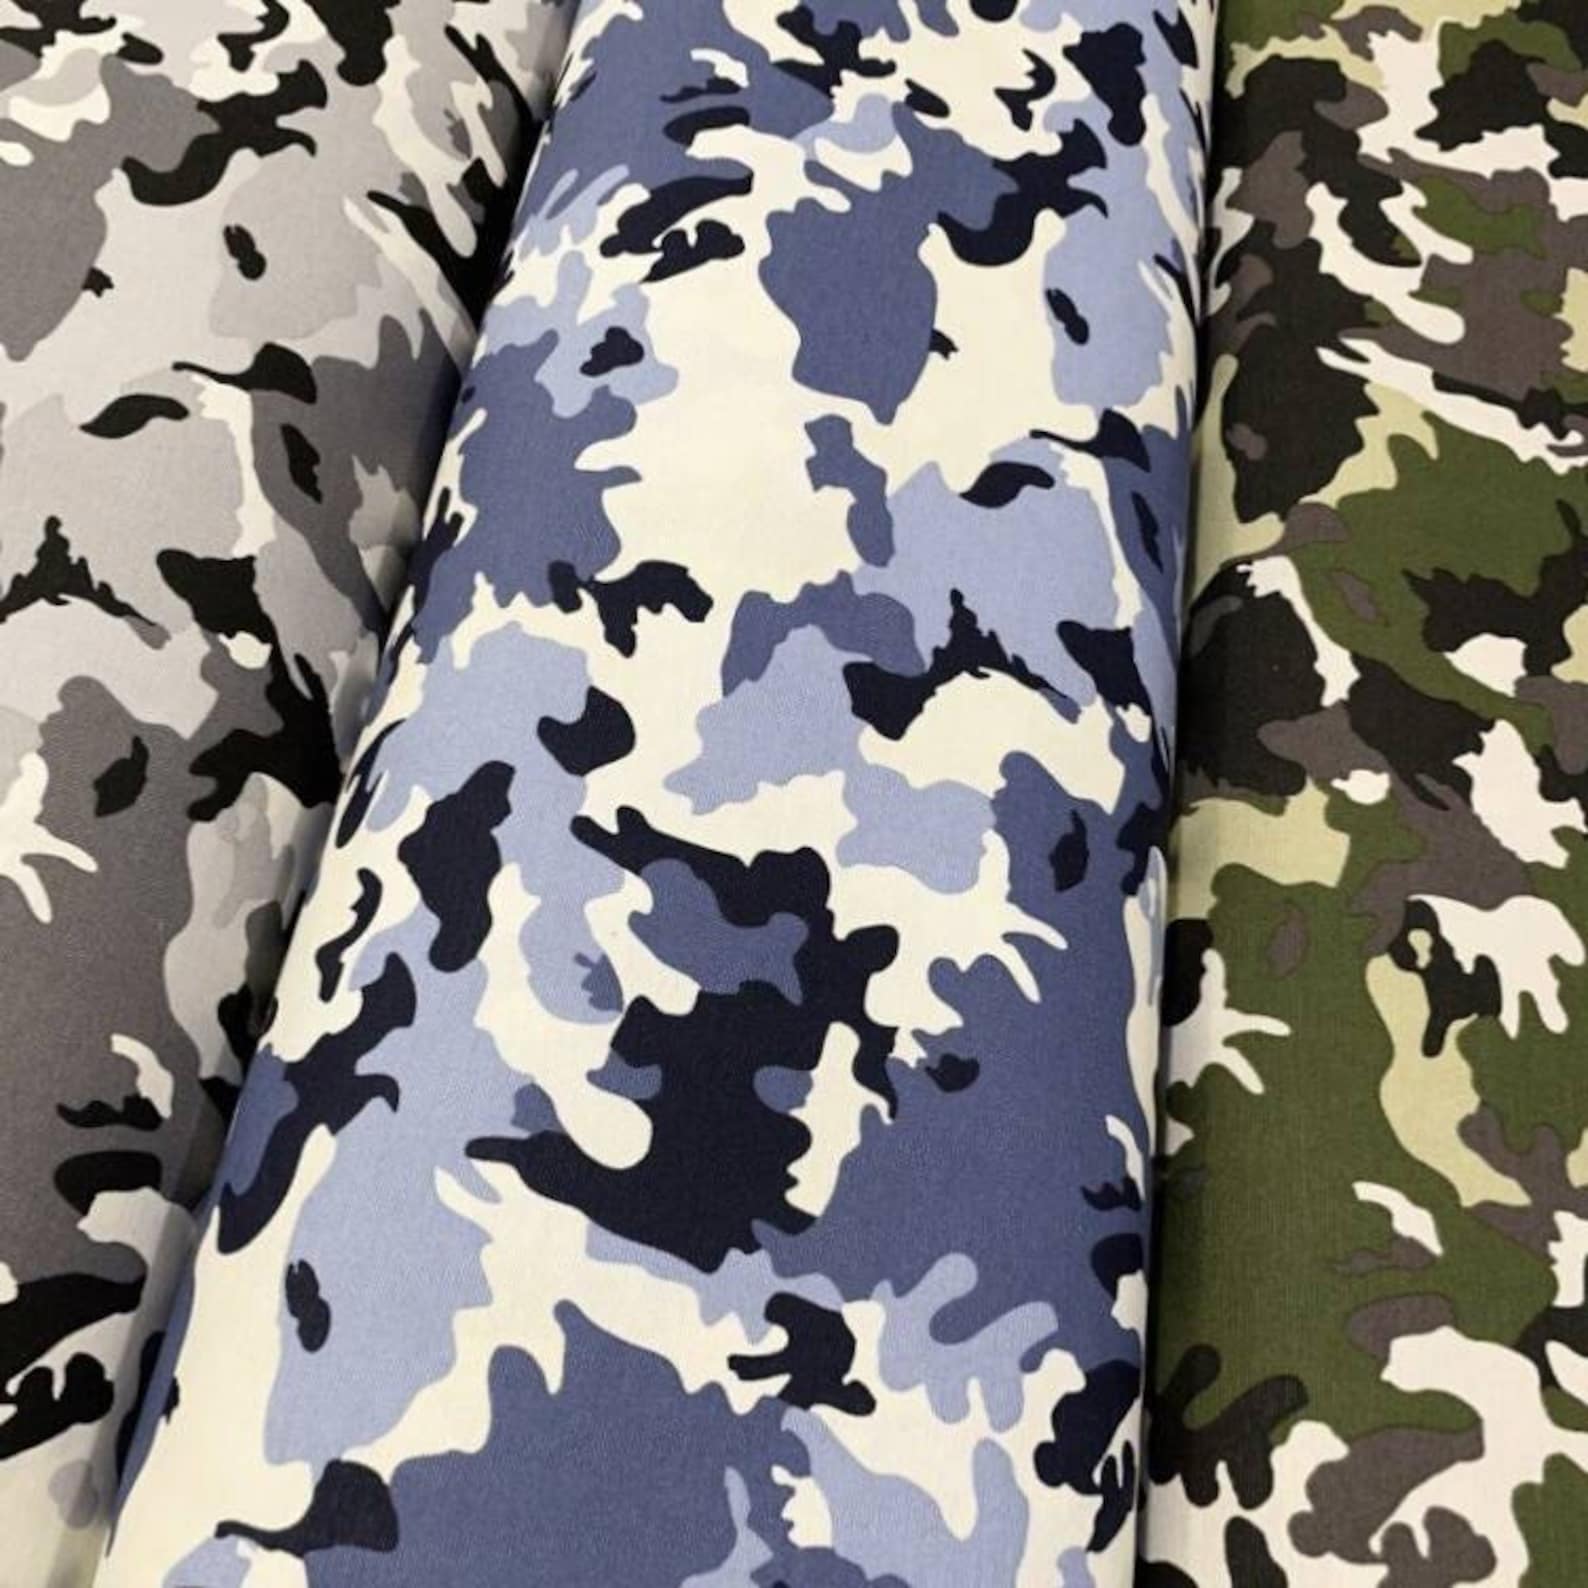 Gray Camouflage Fabric By The Yard Cotton Canvas Upholstery | Etsy